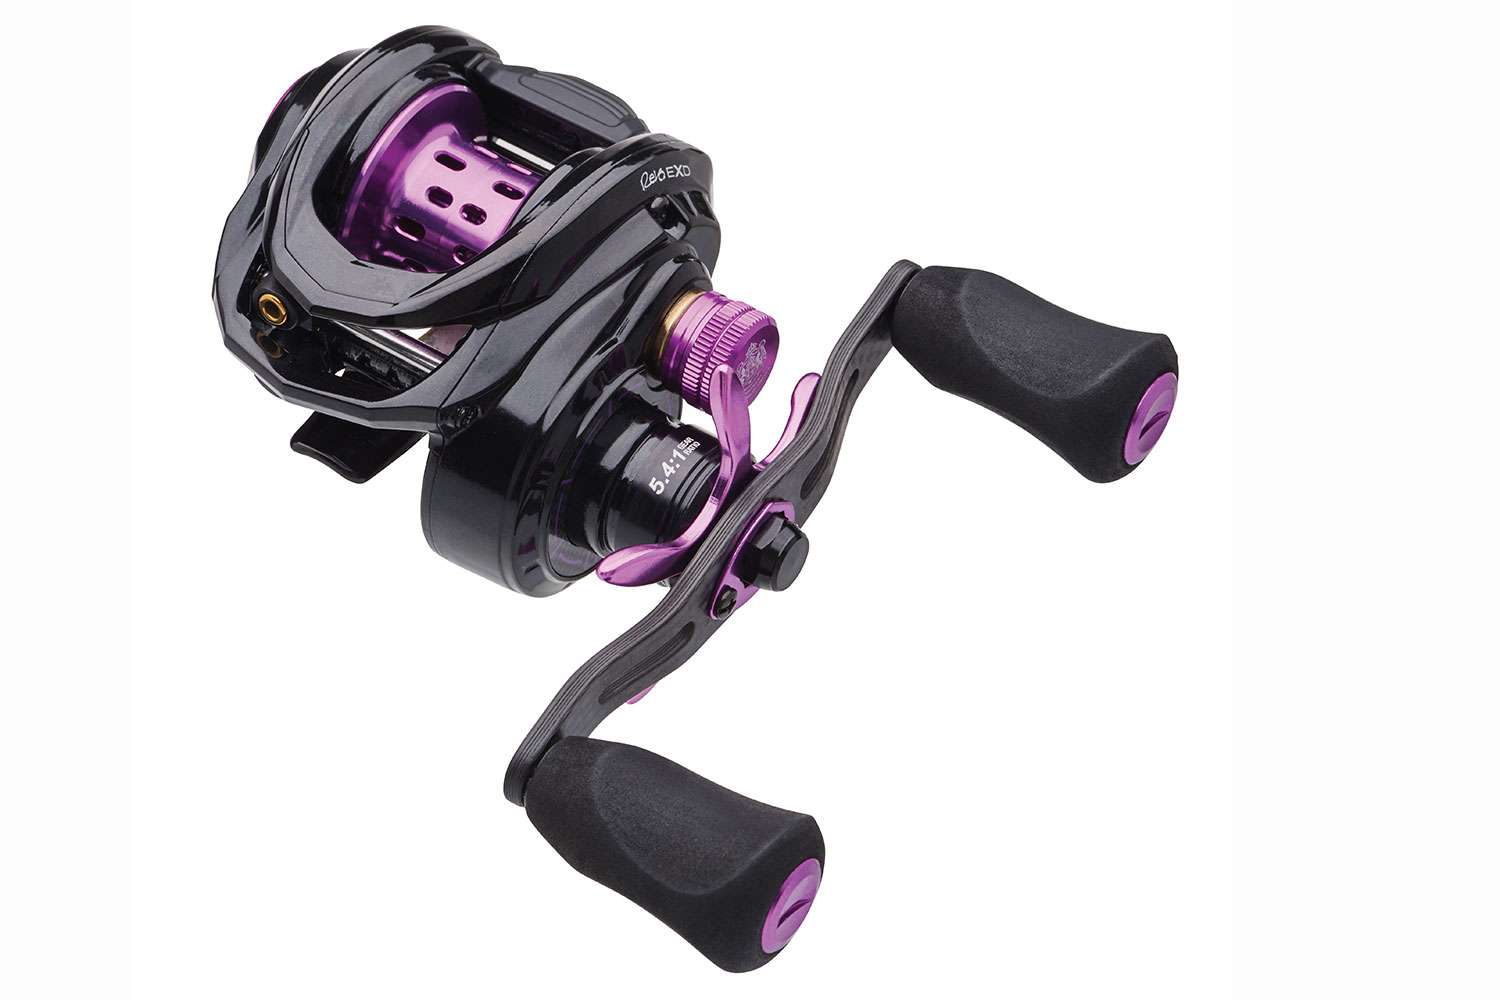 <p><b>Abu Garcia Revo EXD</b></p>
The Abu Garcia Revo EXD Reel is designed to provide anglers with maximum casting capabilities with any bait in their arsenal. The EXD has a total of eleven high-performance bearings, including two custom EXD bearings on the spool shaft, along with an extremely lightweight machined EXD finesse spool providing low start up inertia. These advancements make it easier to cast lighter weight baits. The EXD gives anglers the longest-casting reel Abu Garcia has ever made and comes in both right- and left- handed models.<br>
<p><b>MSRP $299.95</b></p>
<a href=